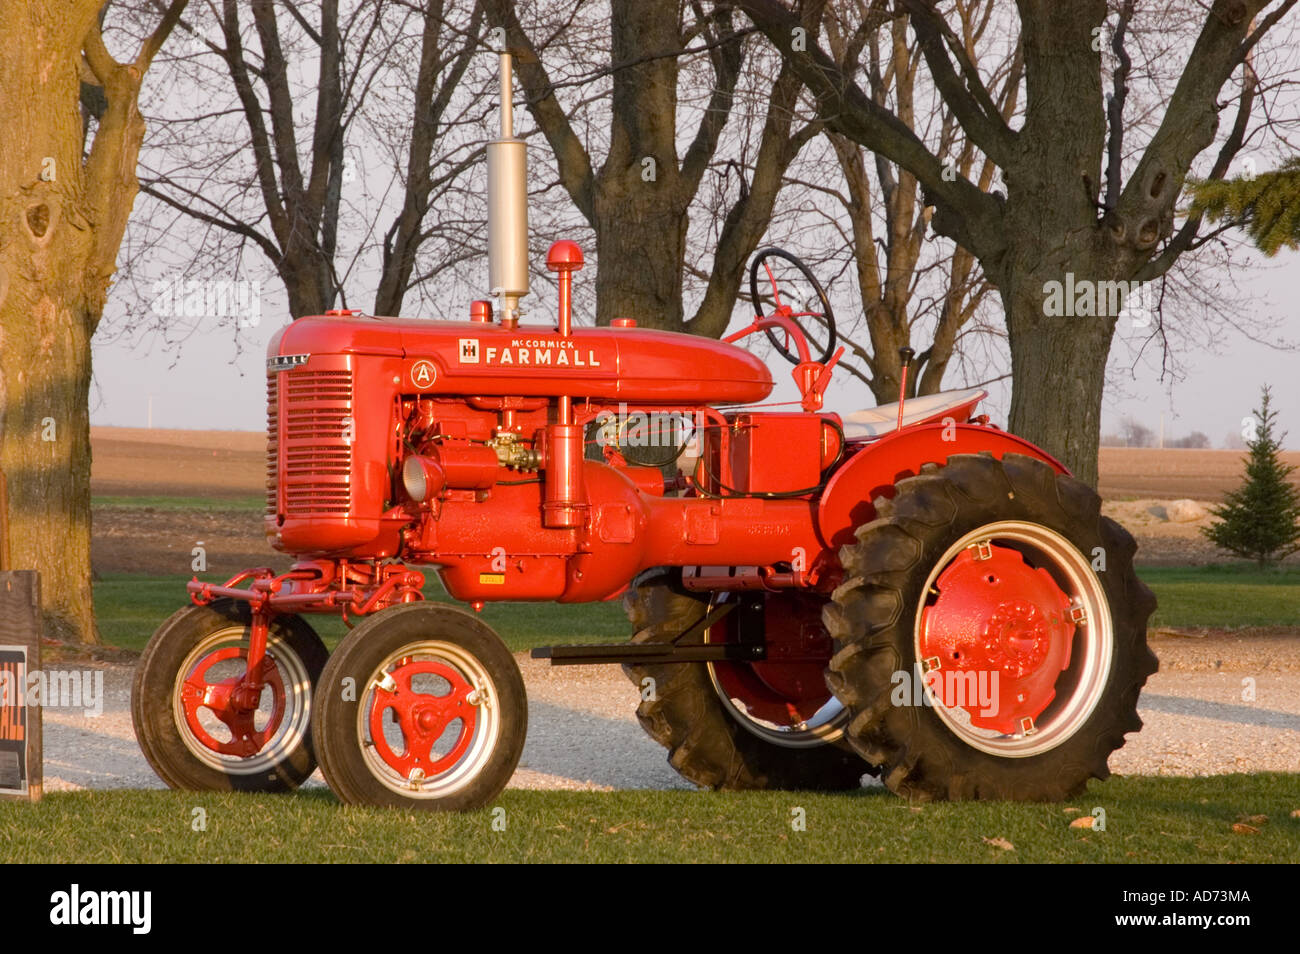 Model A Farmall tractor restored by Mike VonBergen of Mike s Tractors Hebron IL USA Stock Photo